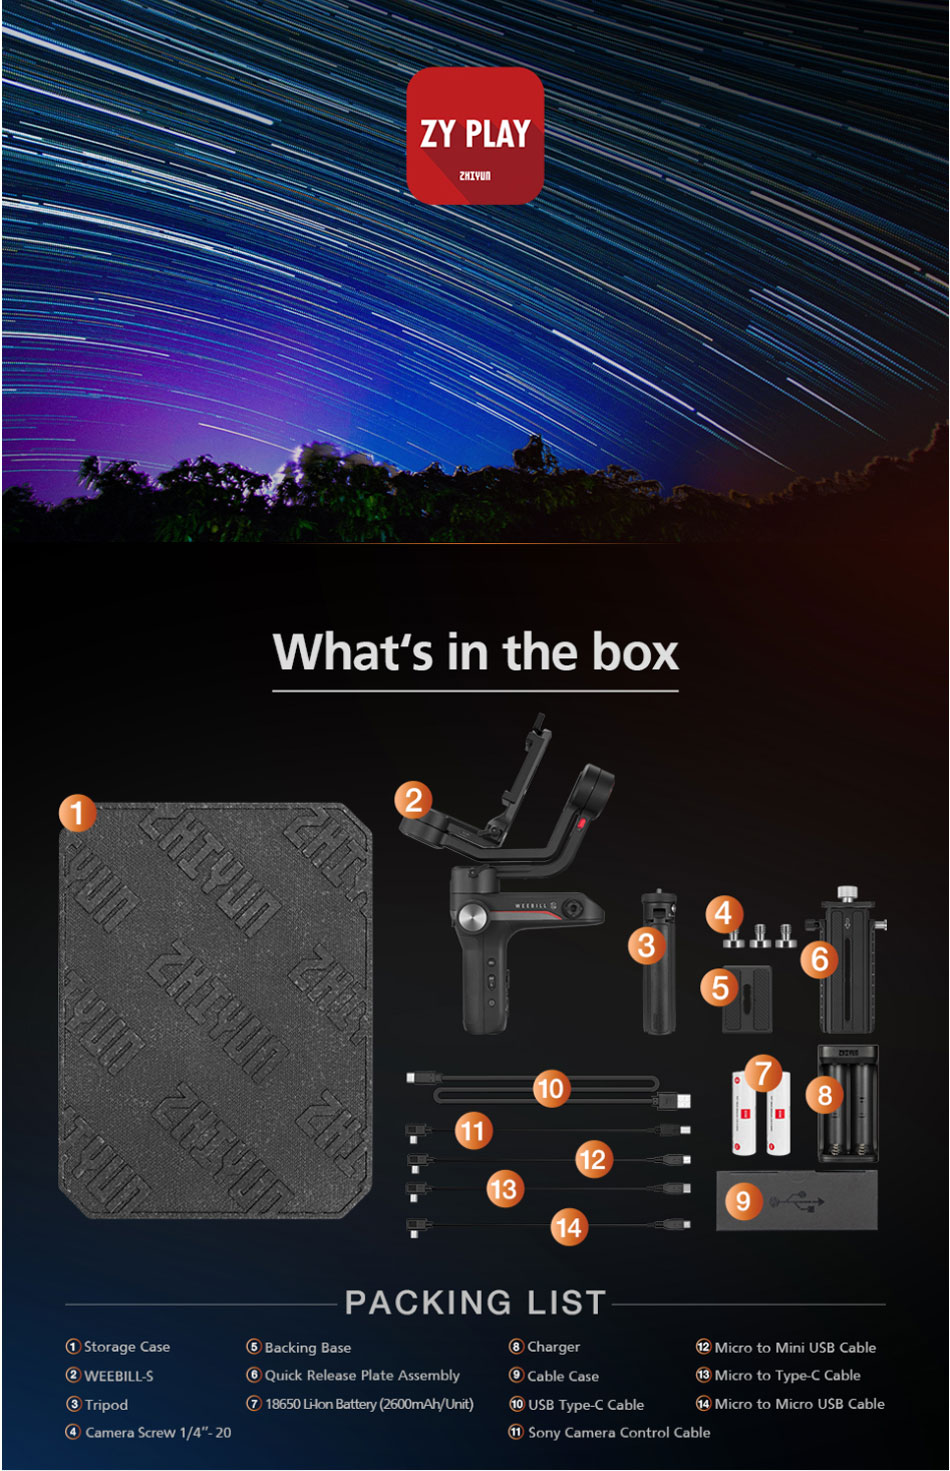 Zhiyun-Weebill-S-3-Axis-Handheld-Gimbal-Stabilizer-HD-Image-Transmission-for-Canon-for-Sony-for-Niko-1594762-9